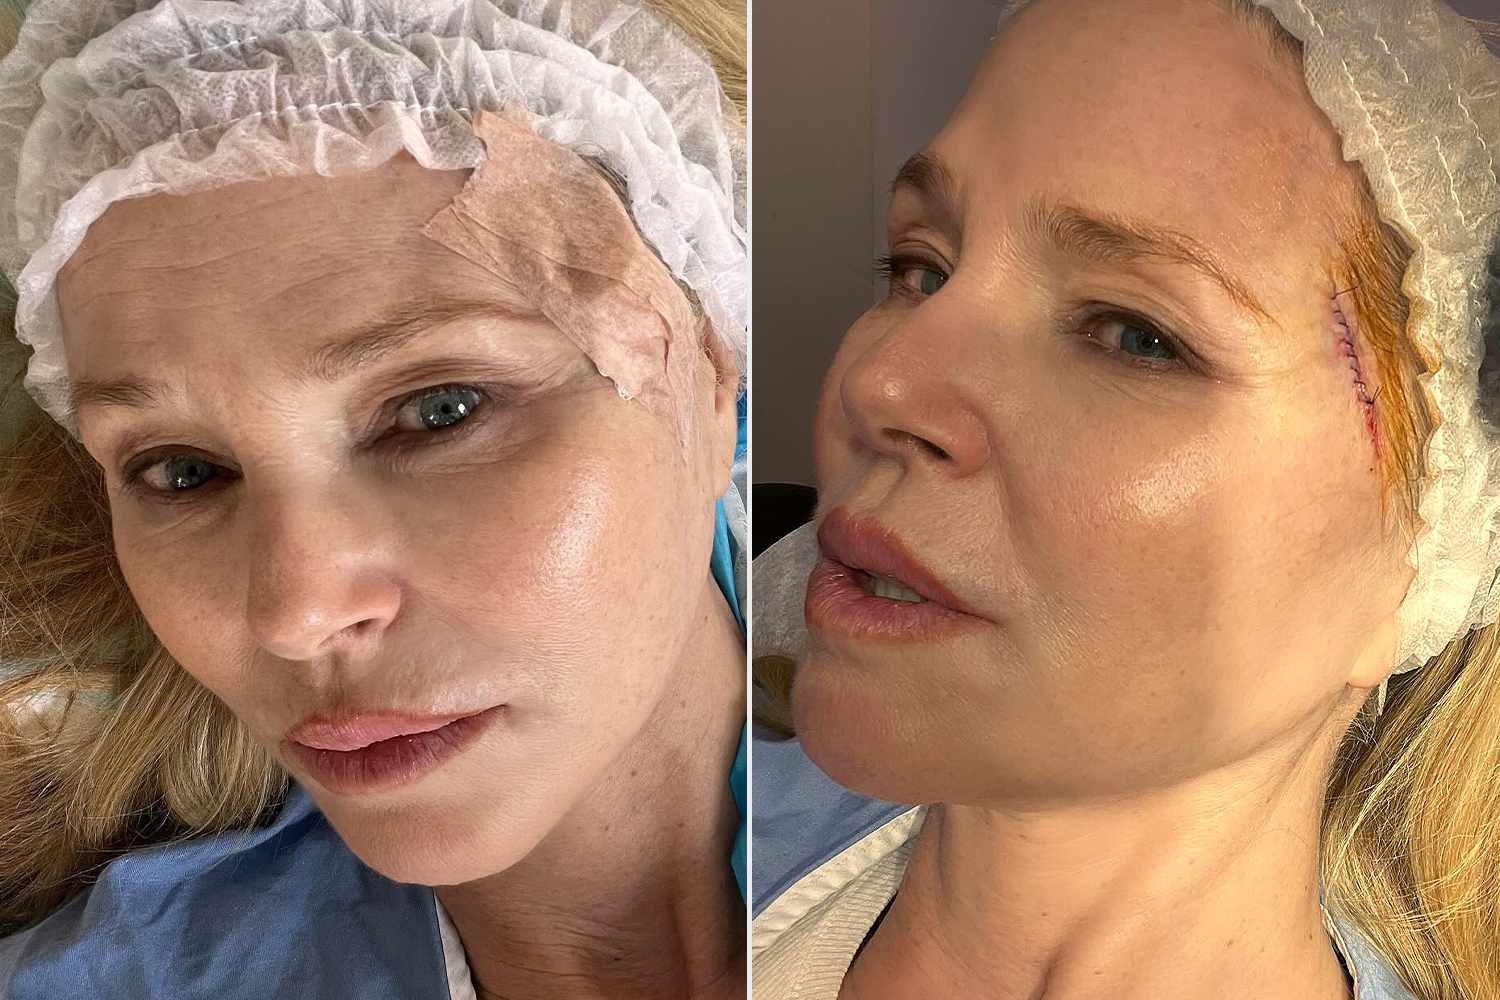 Christie Brinkley Reveals She Had Skin Cancer Removed from Face [Video]